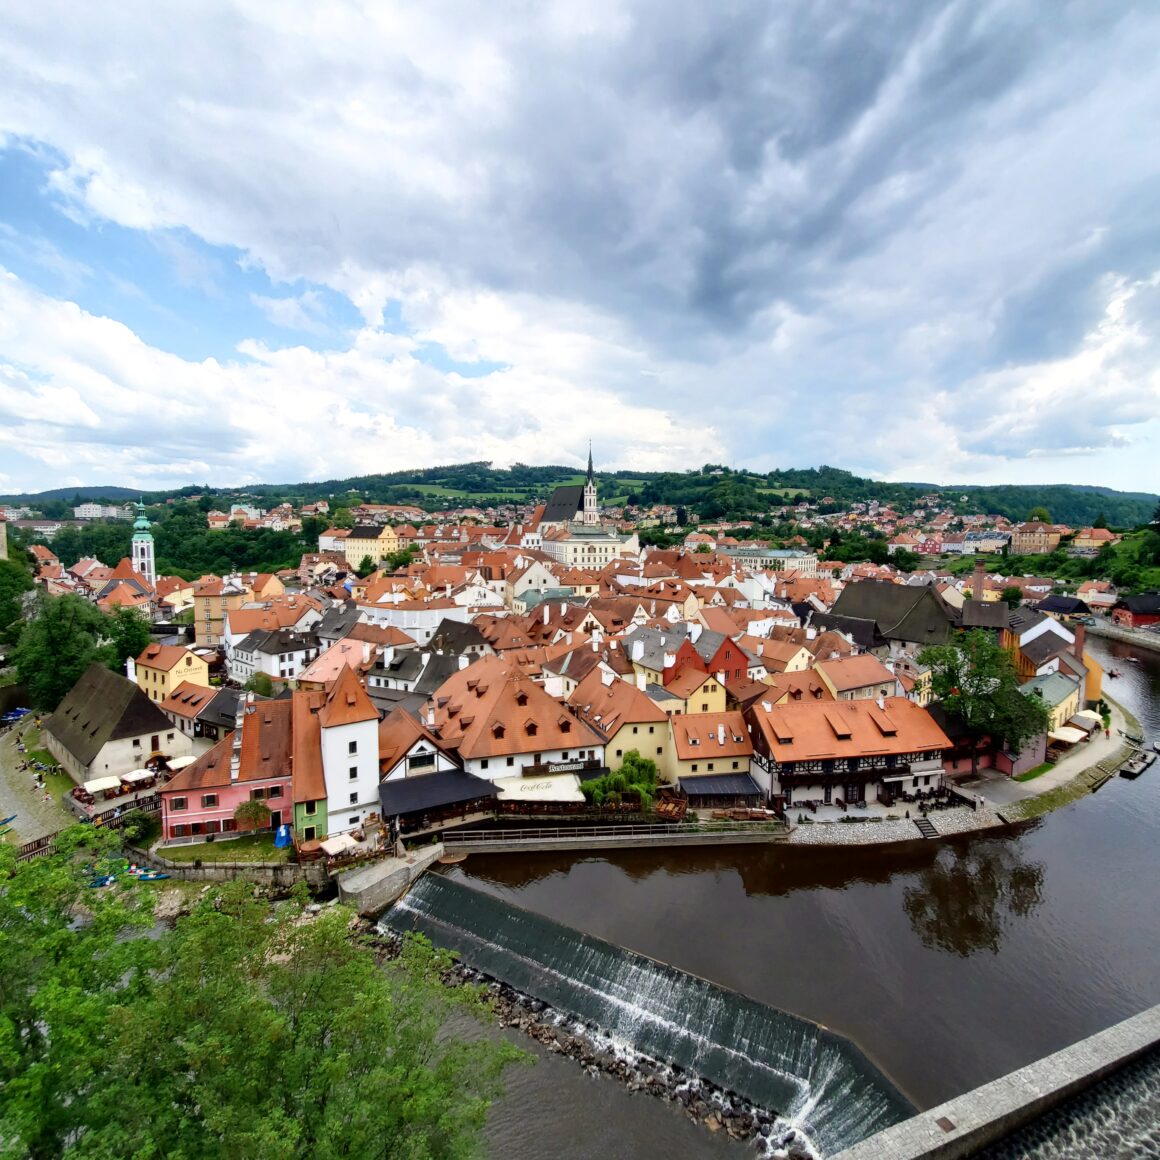 A photo of Český Krumlov from the castle grounds, with the river flowing through the downtown area.